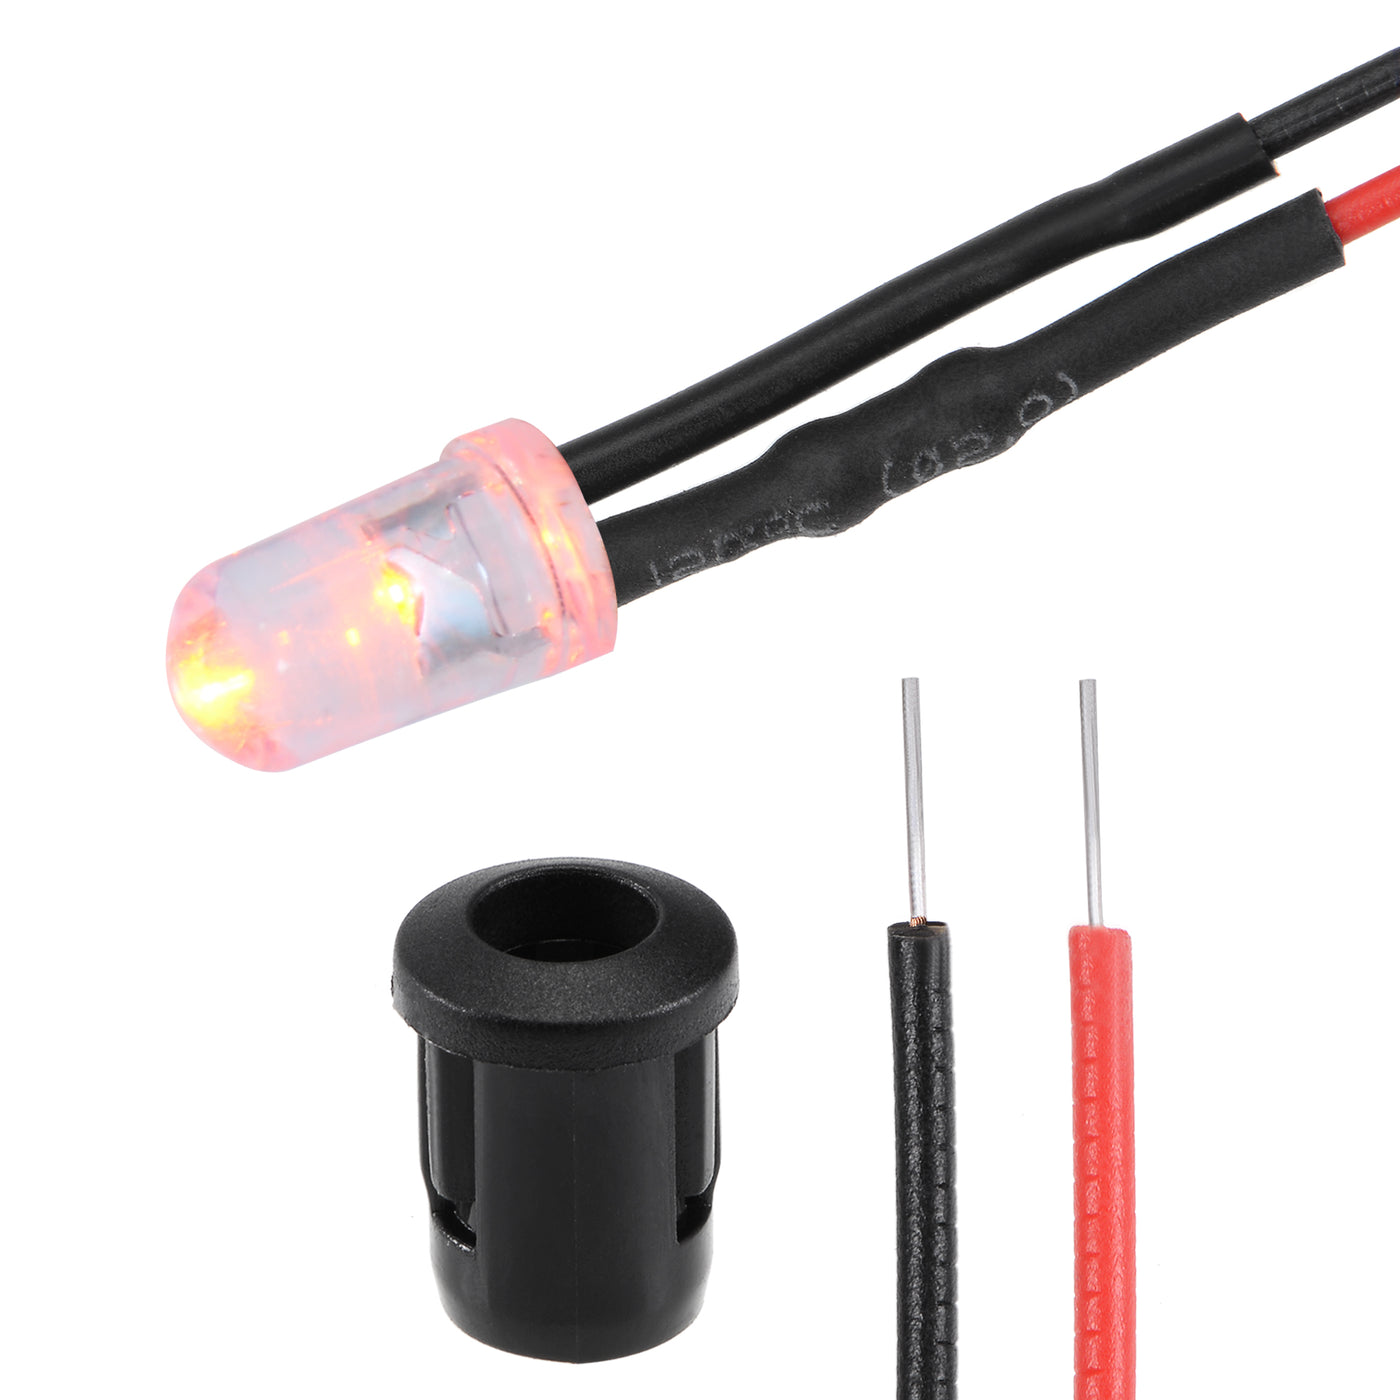 uxcell Uxcell 10Set DC 12V 5mm Pre Wired LED with Holder, Orange Light Round Top Clear Lens, 8mm Panel Mount